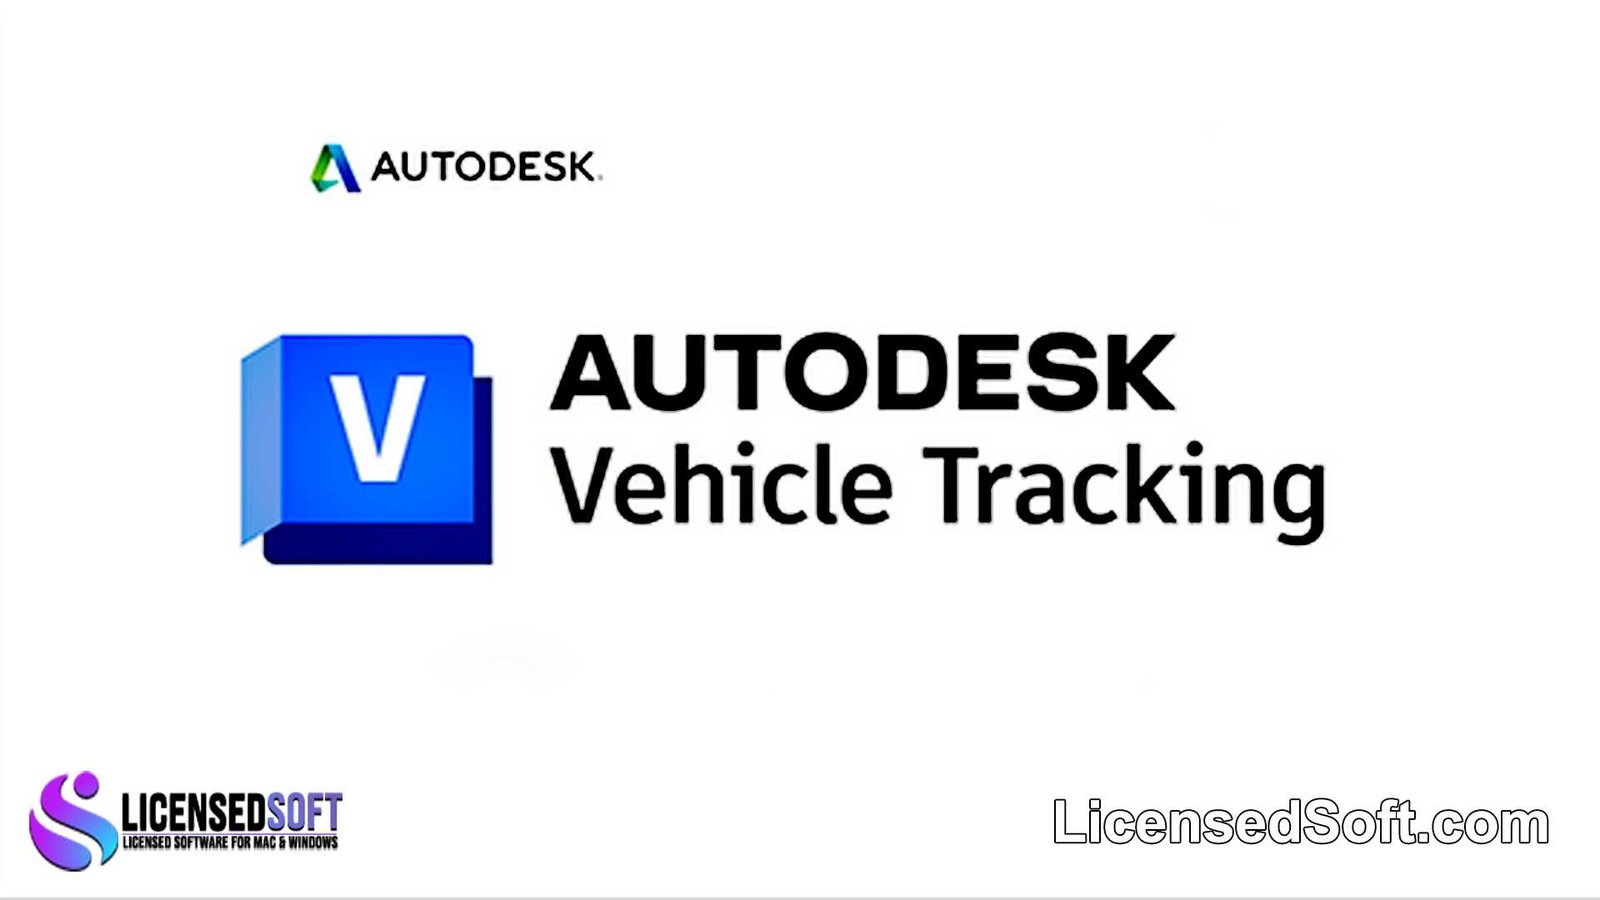 Autodesk Vehicle Tracking 2023 Perpetual License By LicensedSoft